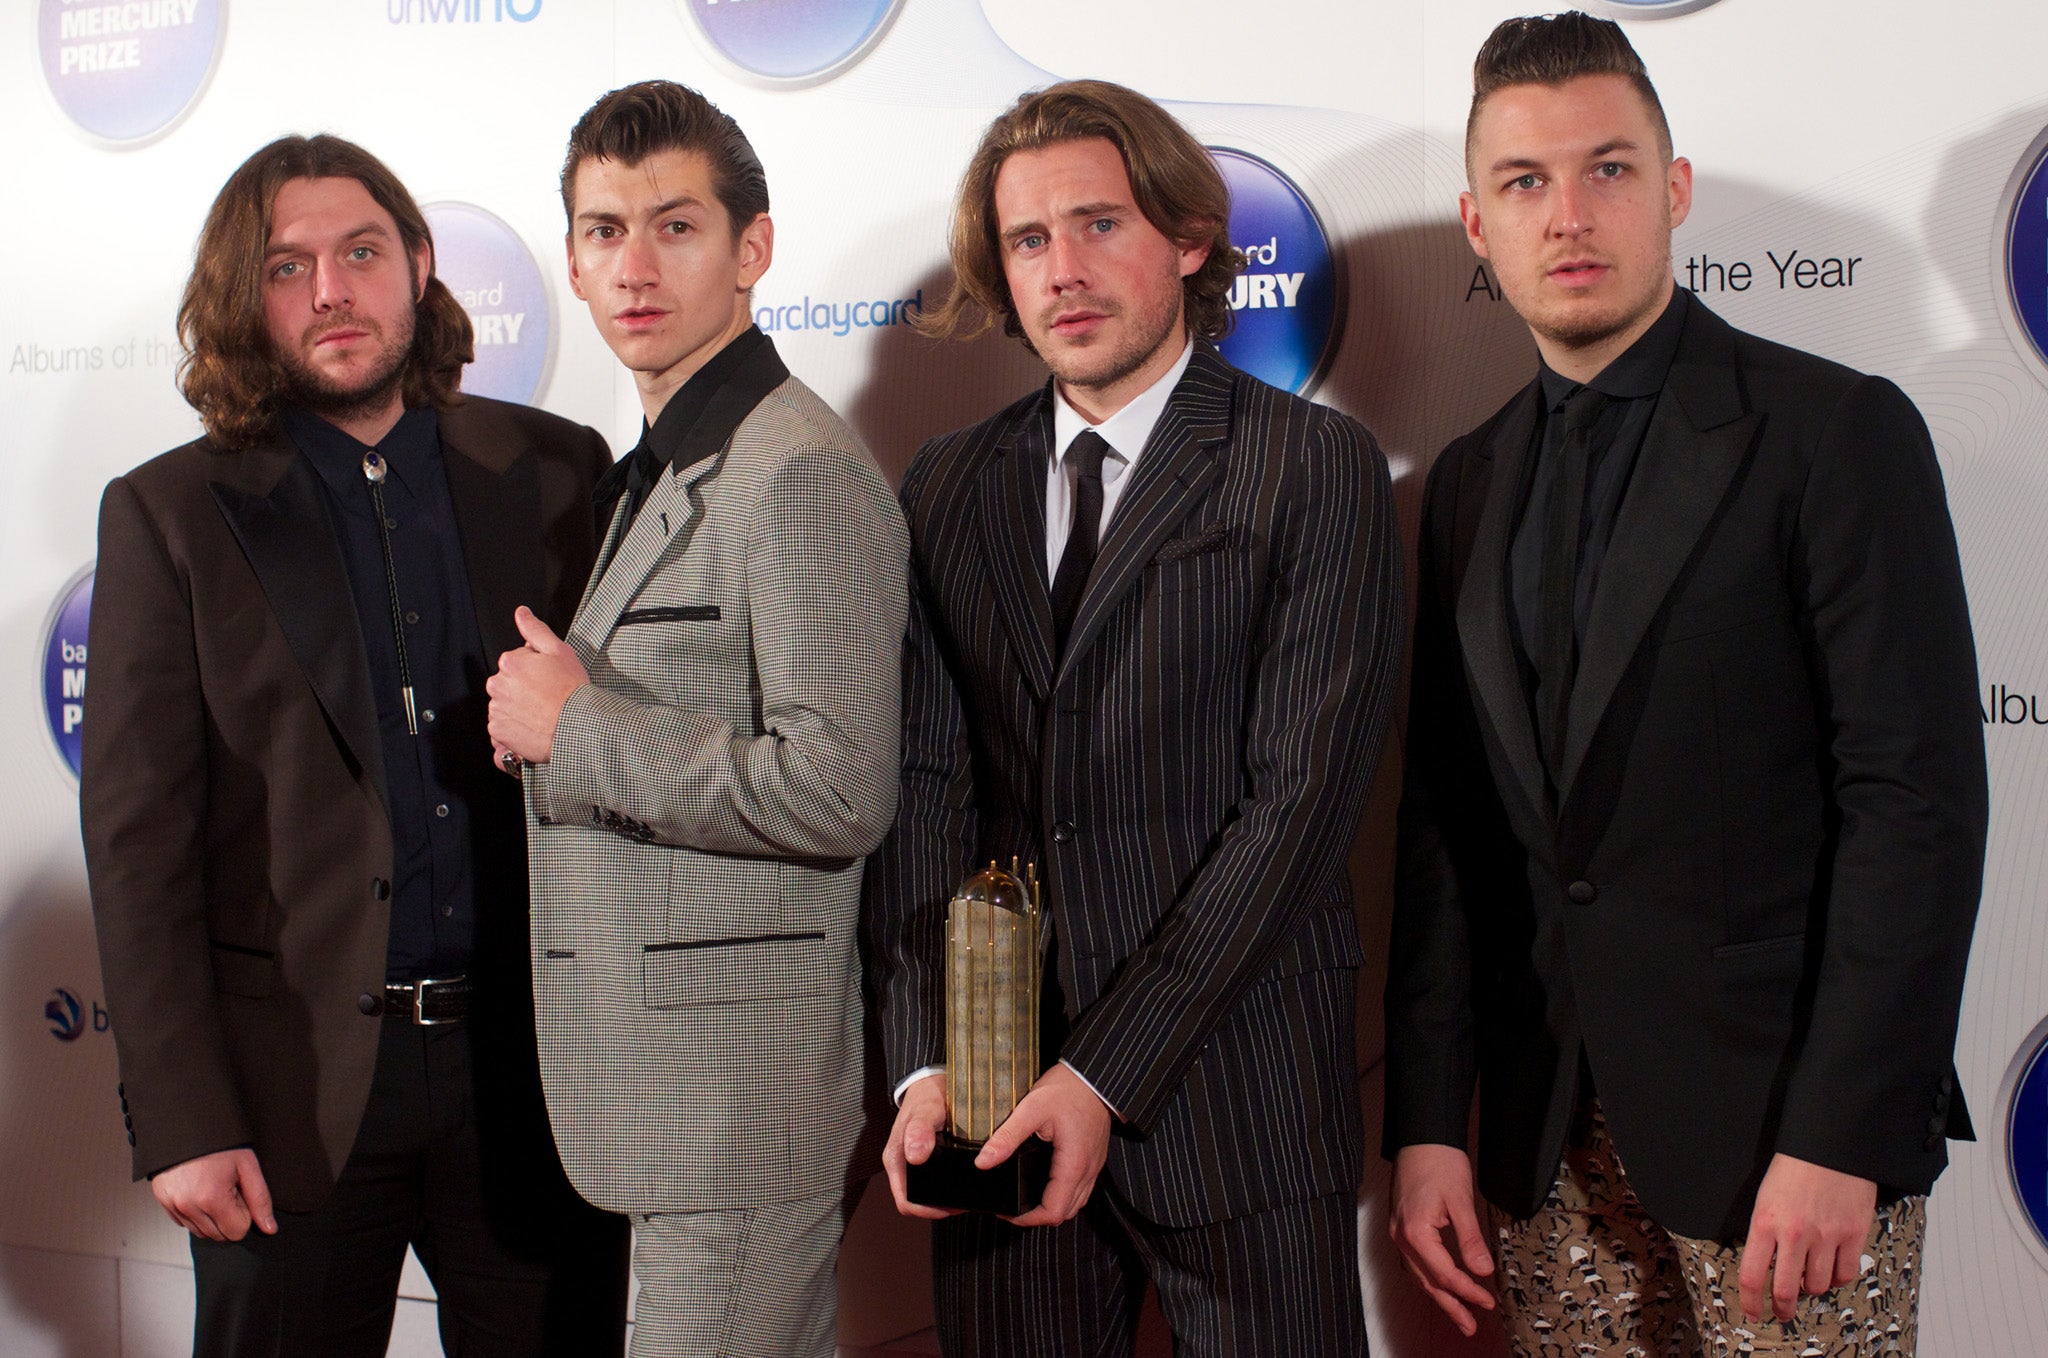 Arctic Monkeys pose with their Albums of the Year trophy at the 2013 Mercury Prize